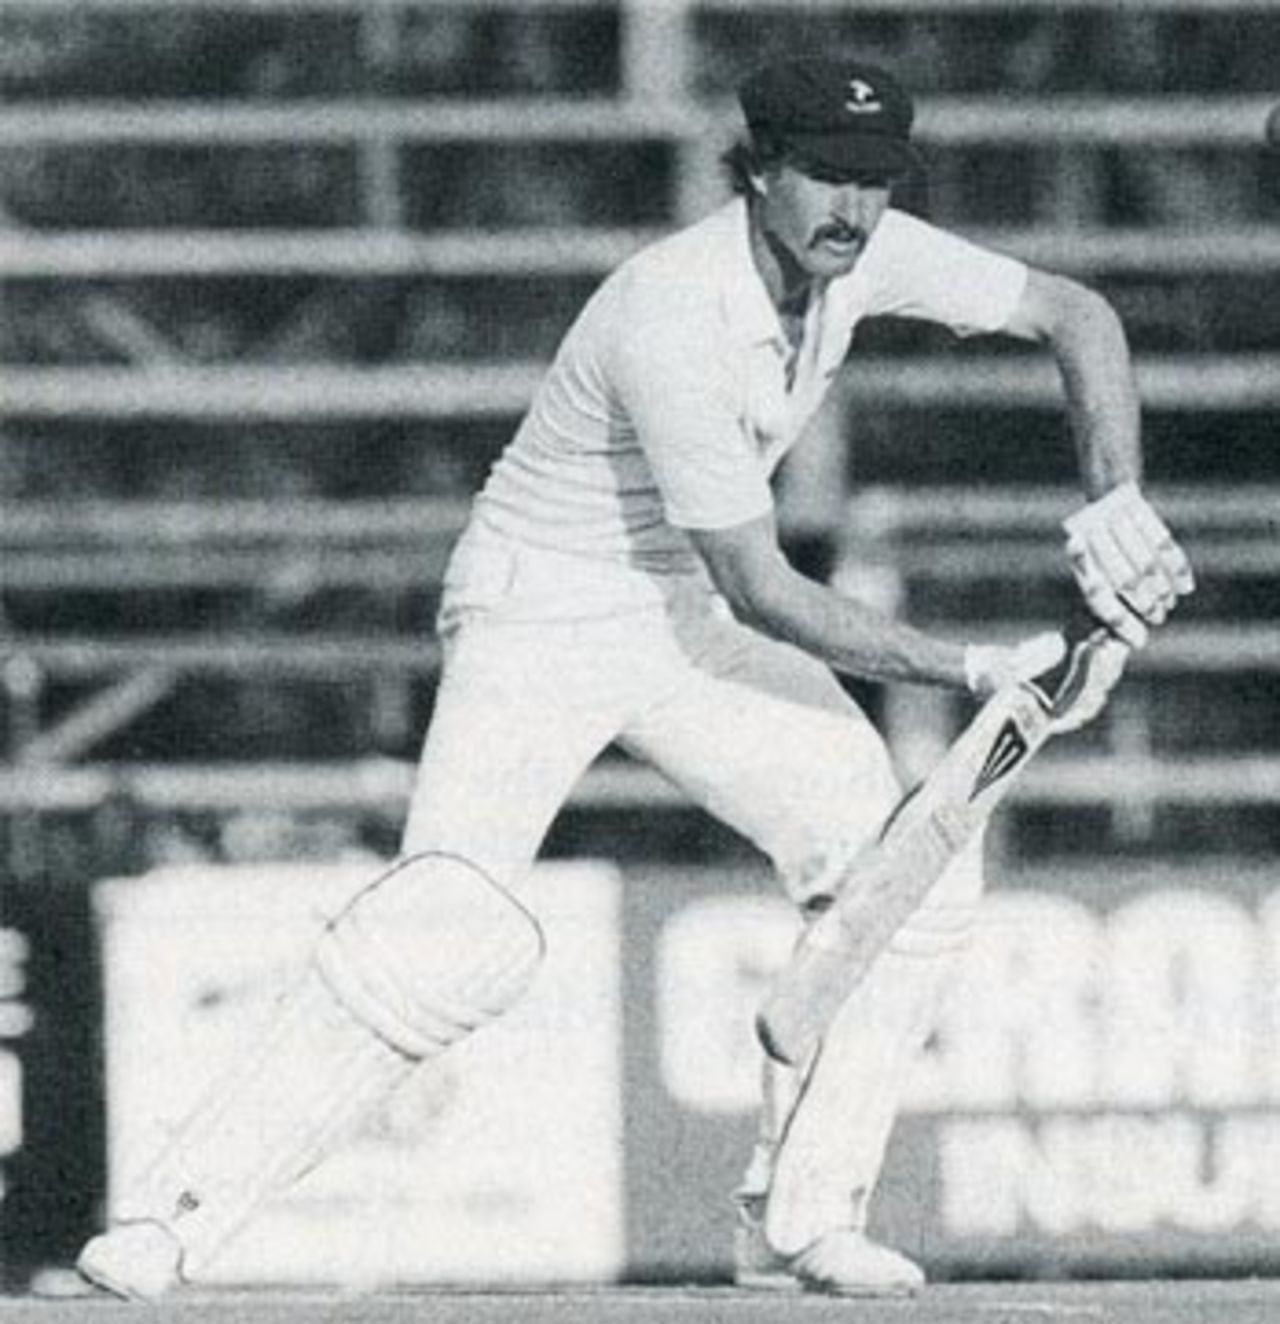 Jimmy Cook batting against the English rebel XI in 1981-82